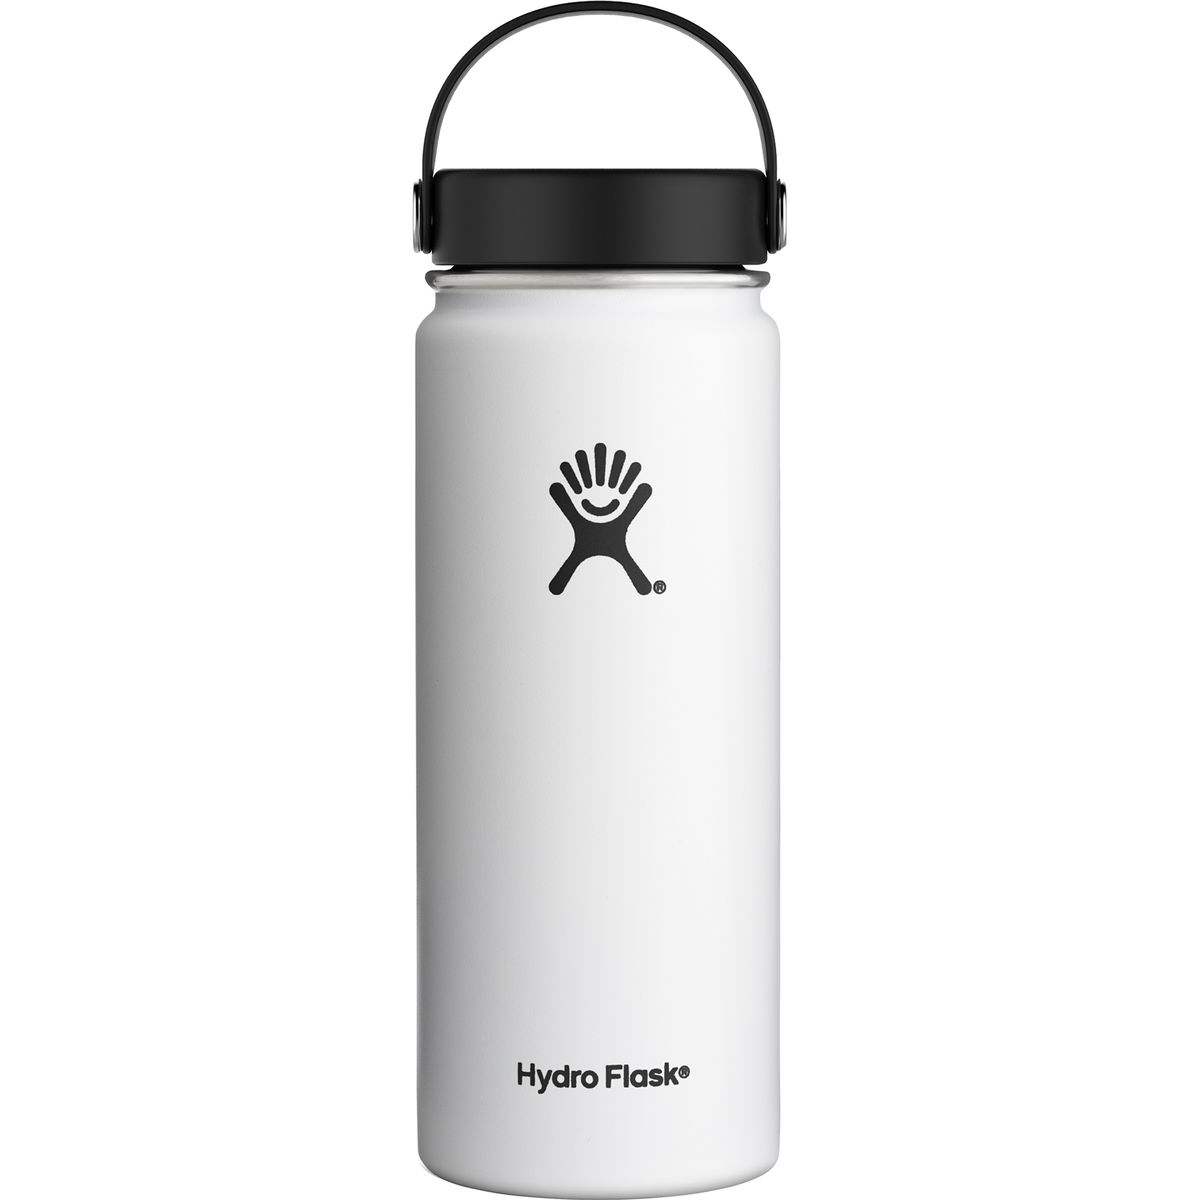 Hydro Flask 18oz Wide Mouth Water Bottle White, One Size